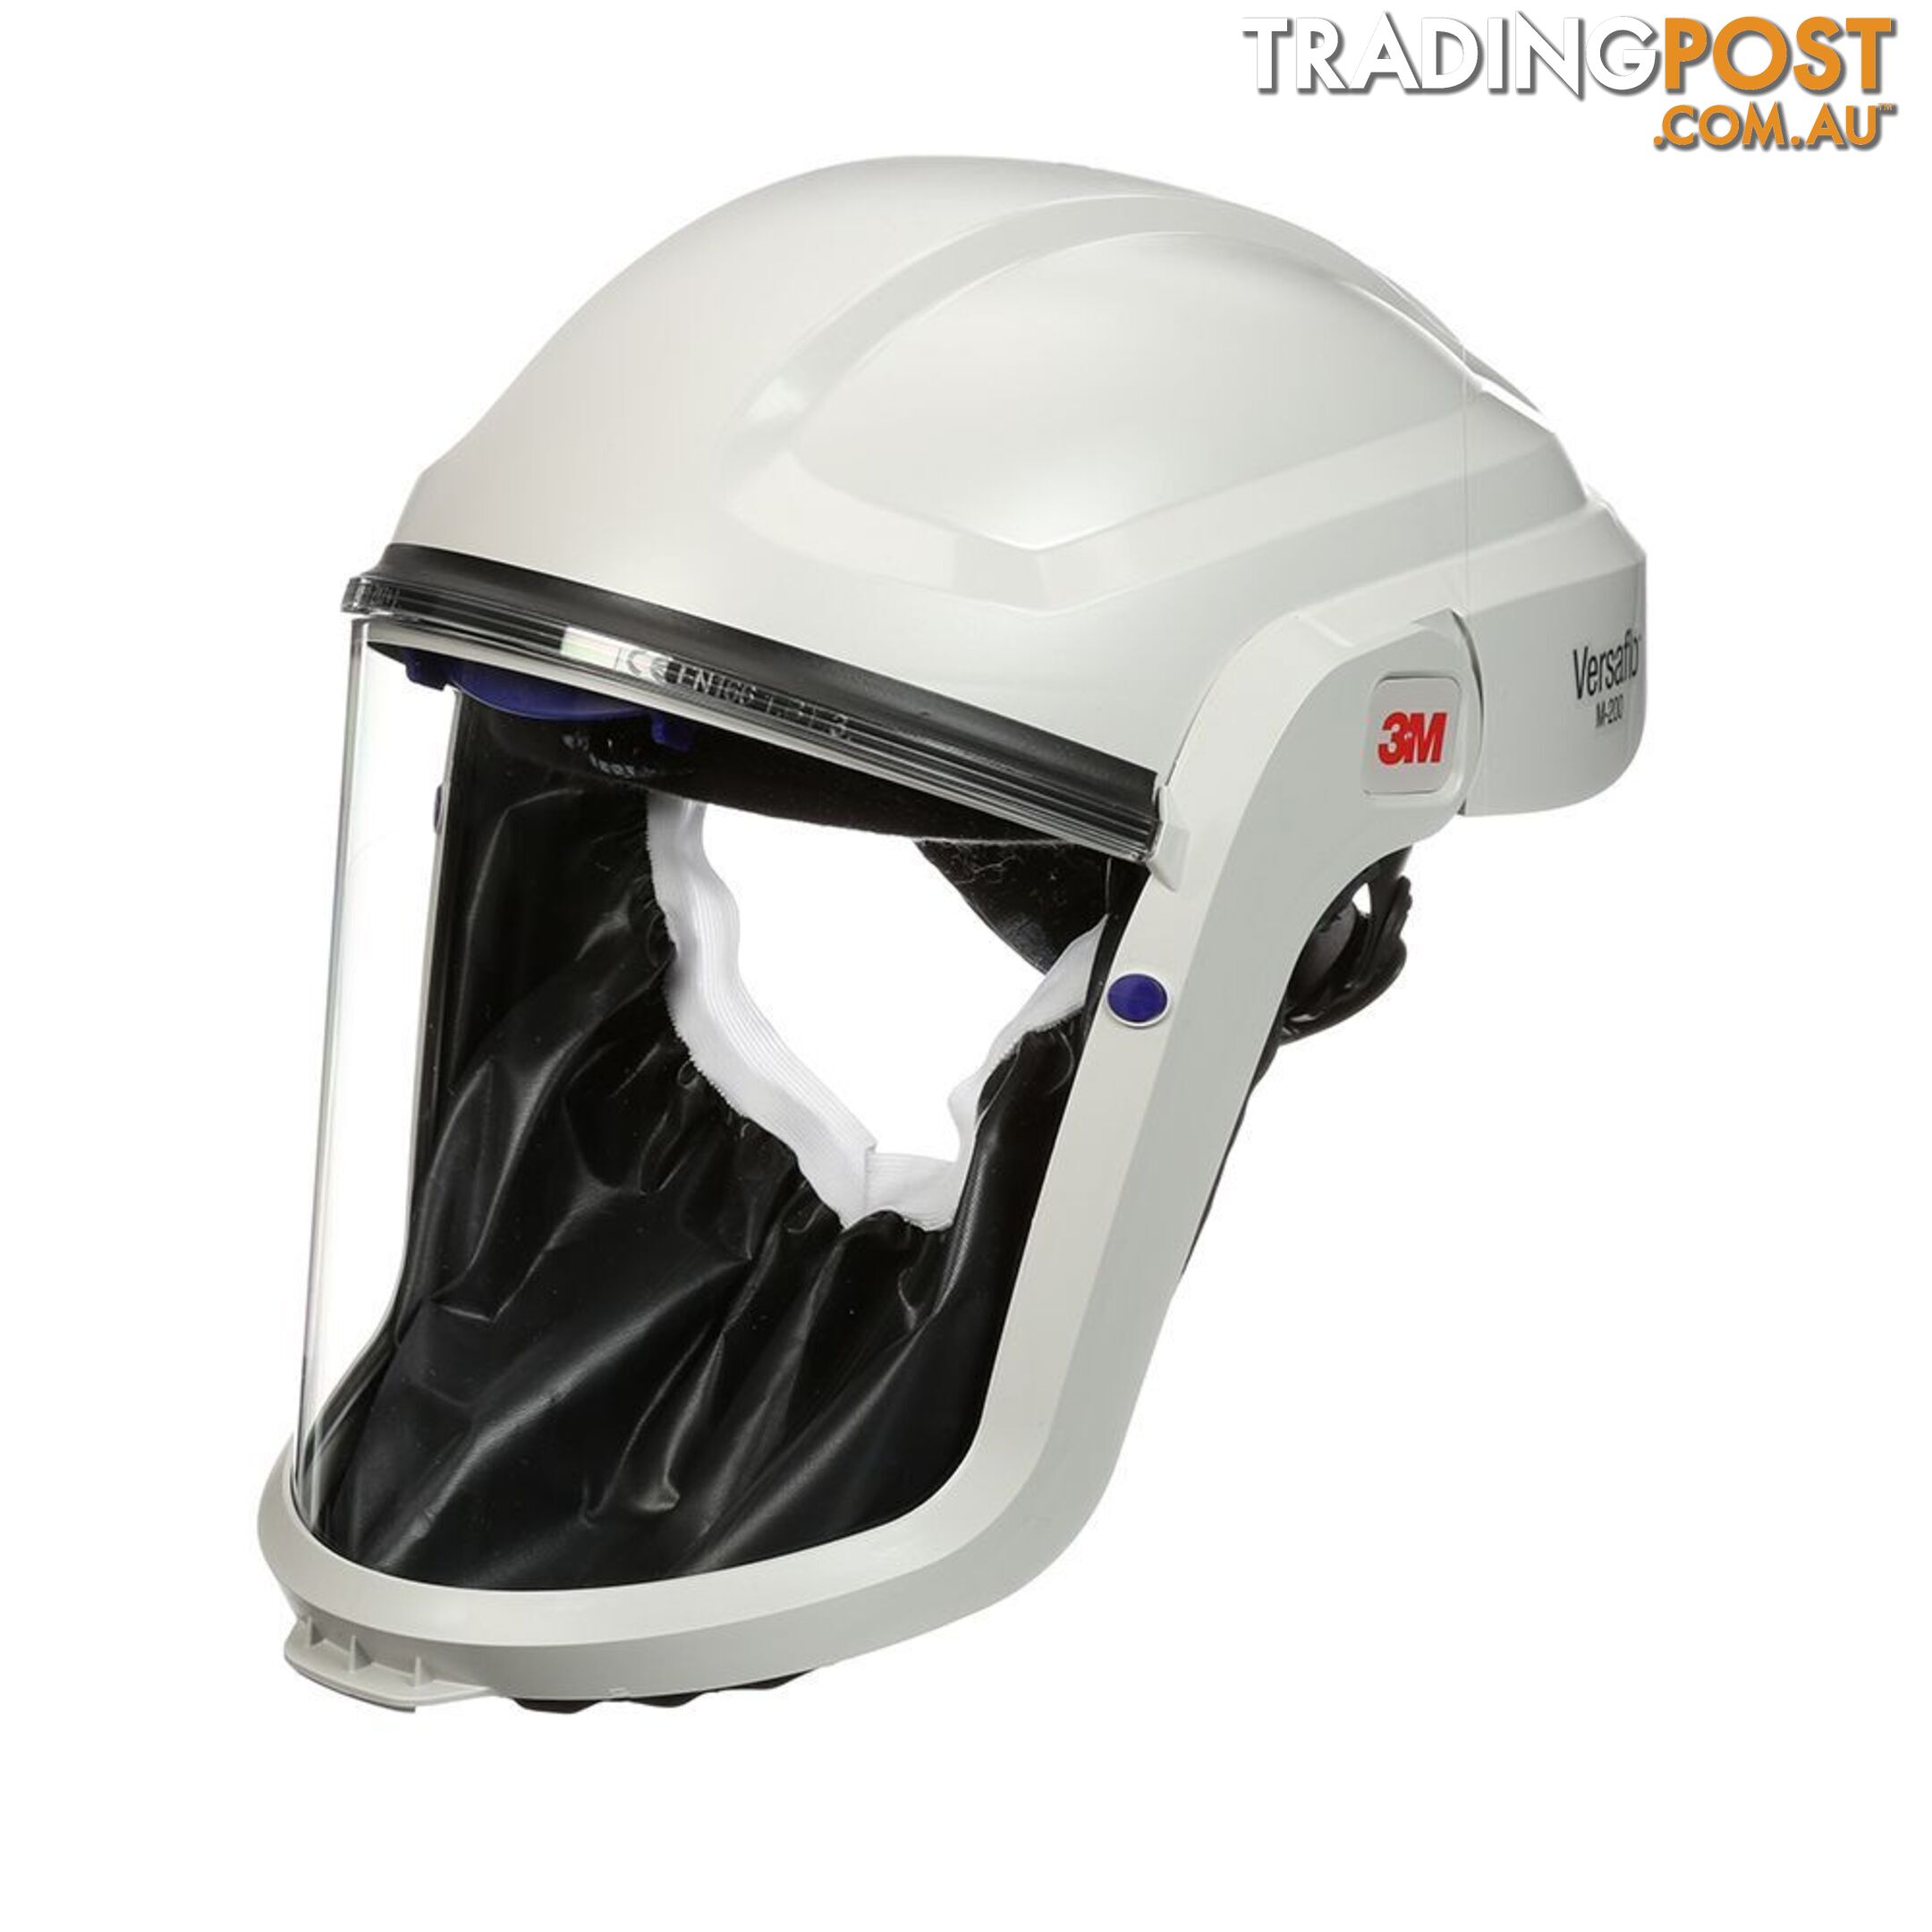 3M Speedglas M-207 Series Face Shield with Fire Retardant Face Seal 895207